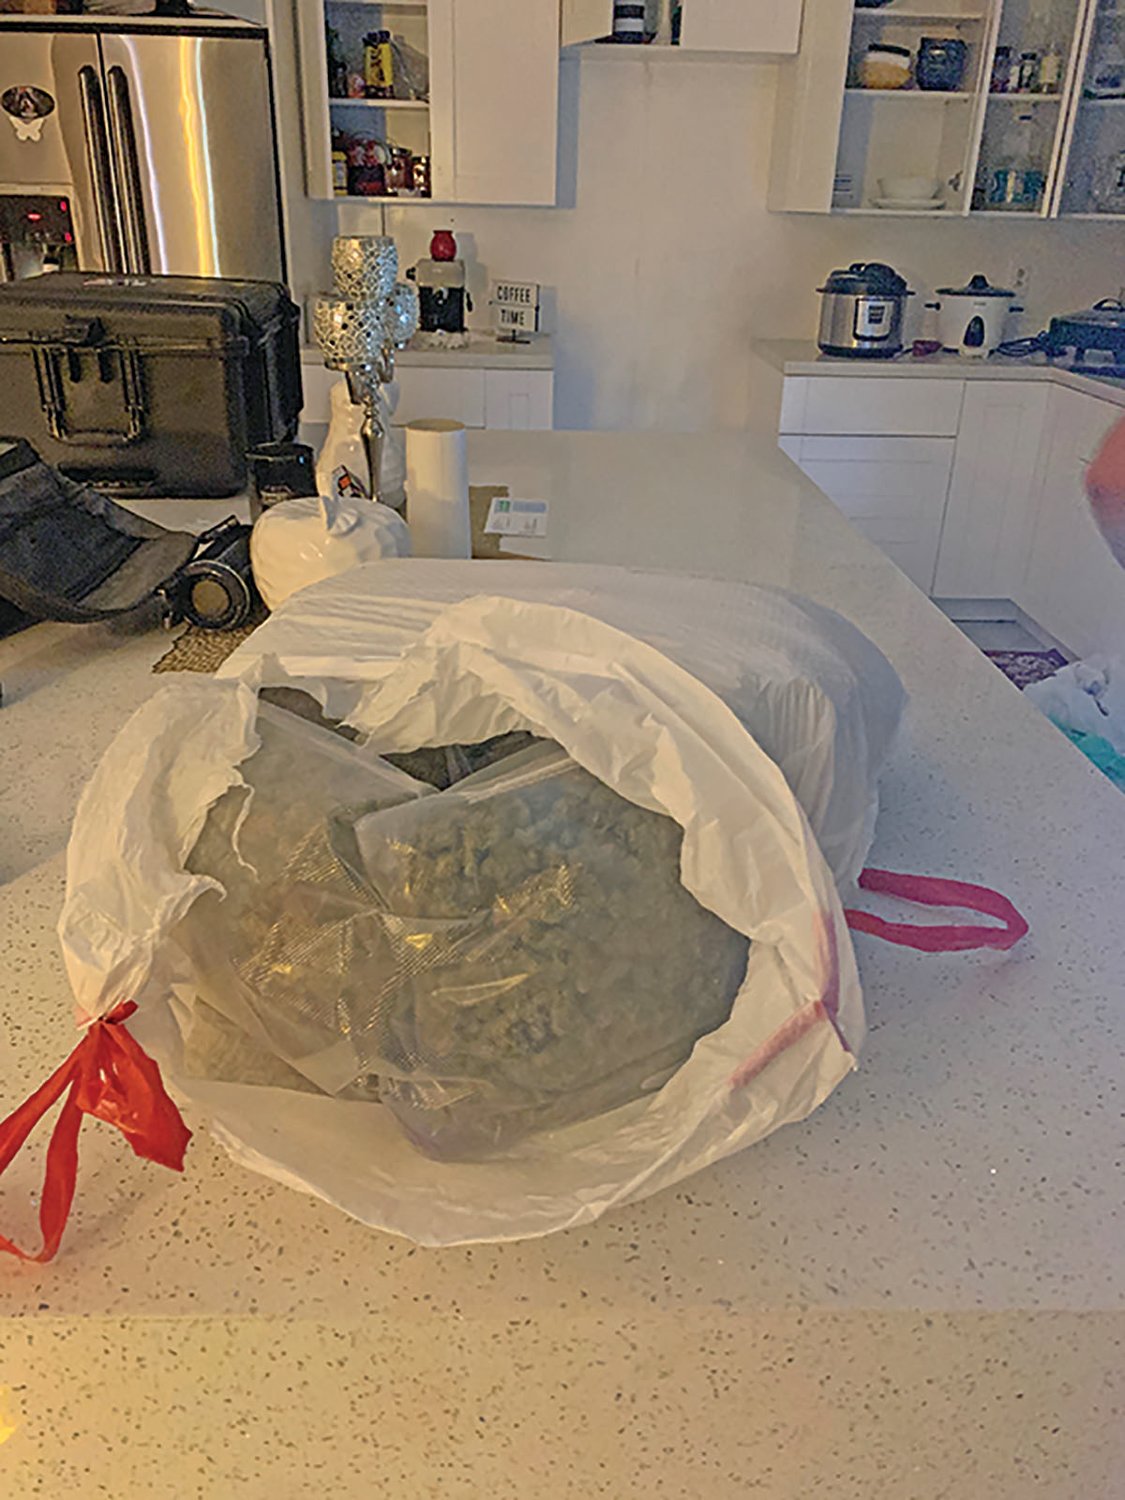 CLEWISTON — Deputies seized 21.72 pounds of marijuana that was prepackaged for sale.